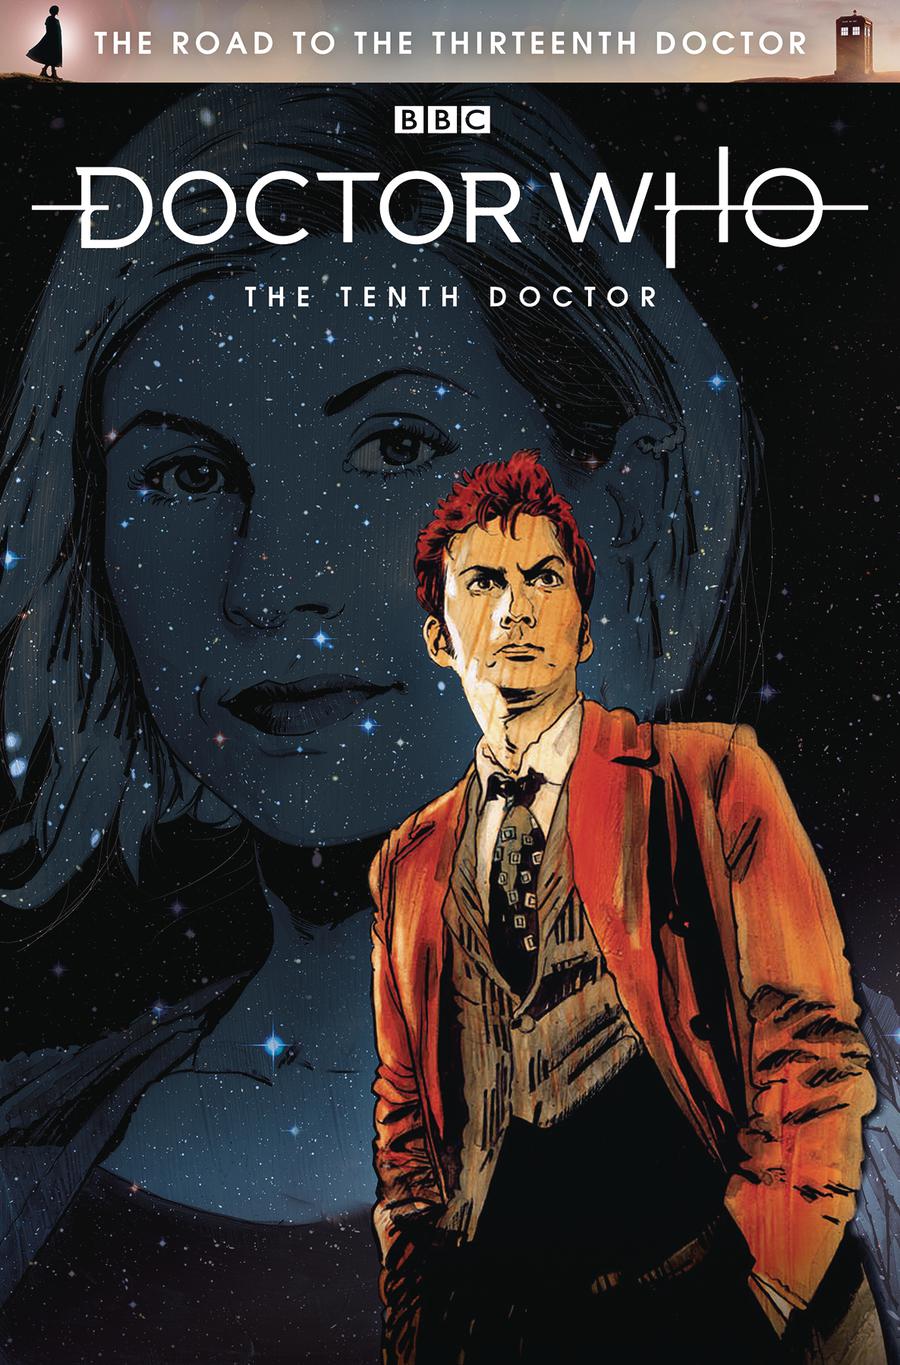 Doctor Who Road To The 13th Doctor #1 10th Doctor Cover A Regular Robert Hack Cover